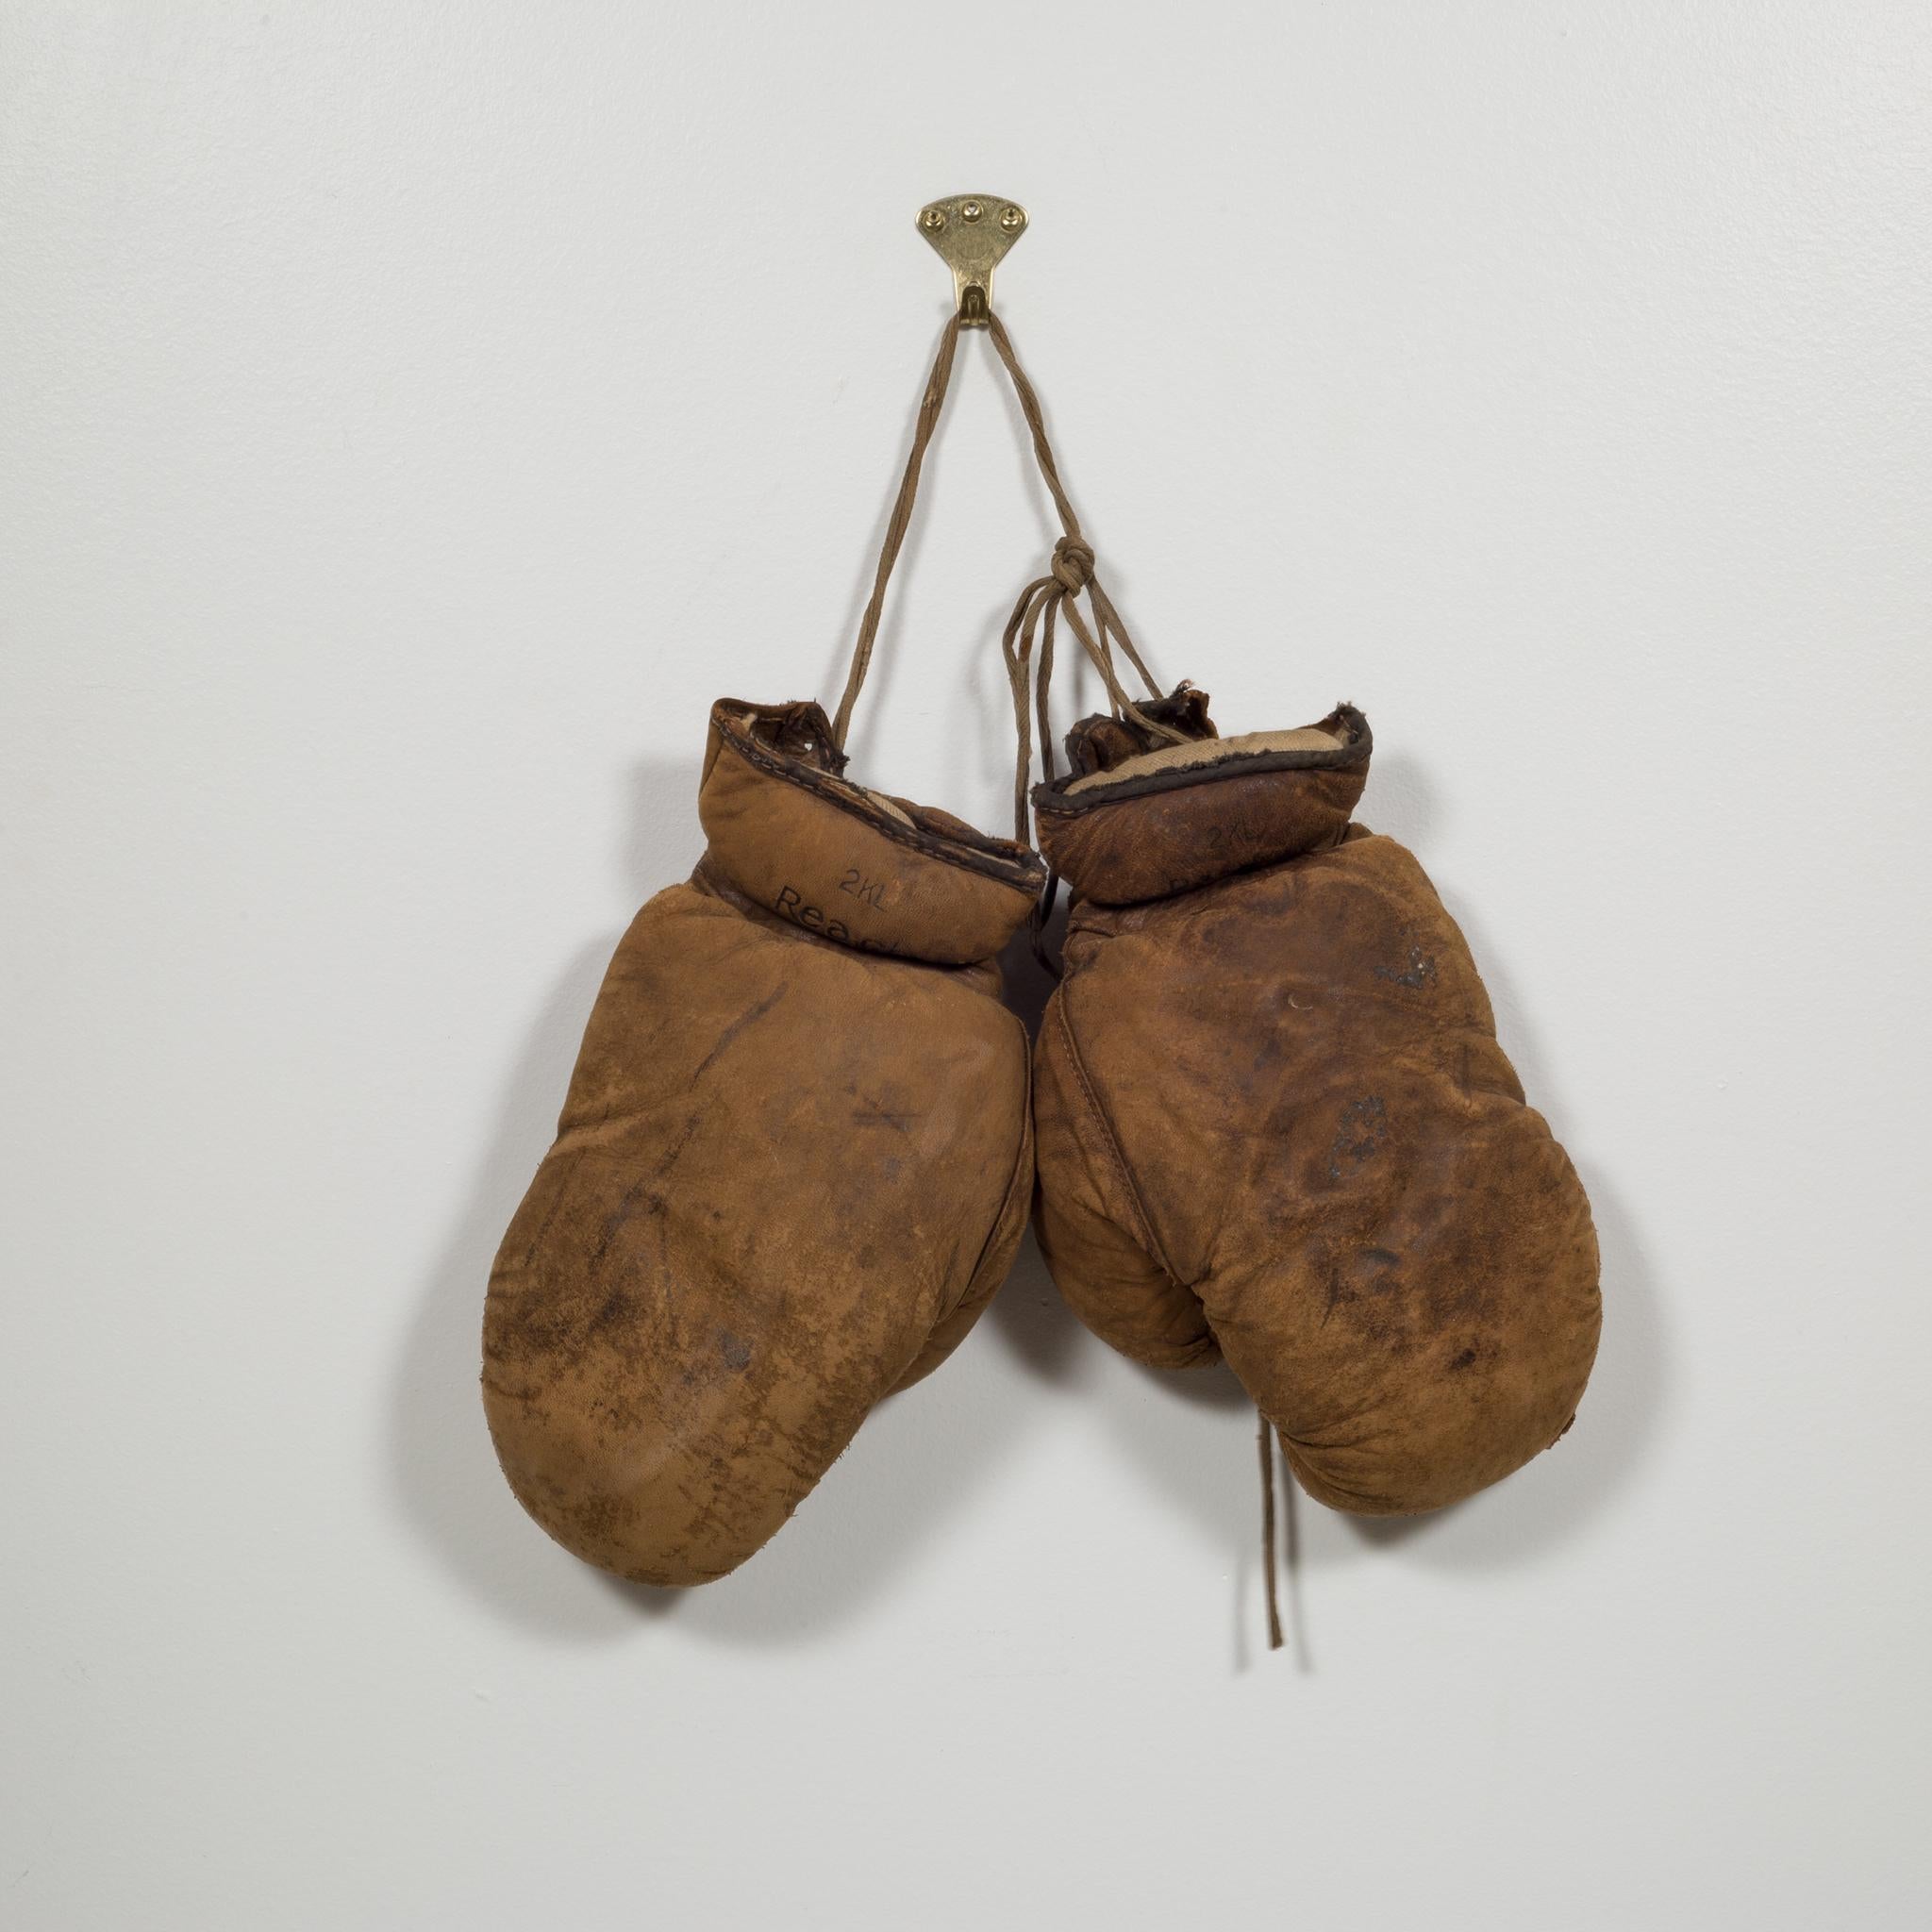 About:
This is a pair of turn of the century vintage junior boxing gloves by A.J. Reach Company, Philadelphia USA. The gloves come with original laces and the leather is in a stable condition with wear some wear from decades of use.

 Creator